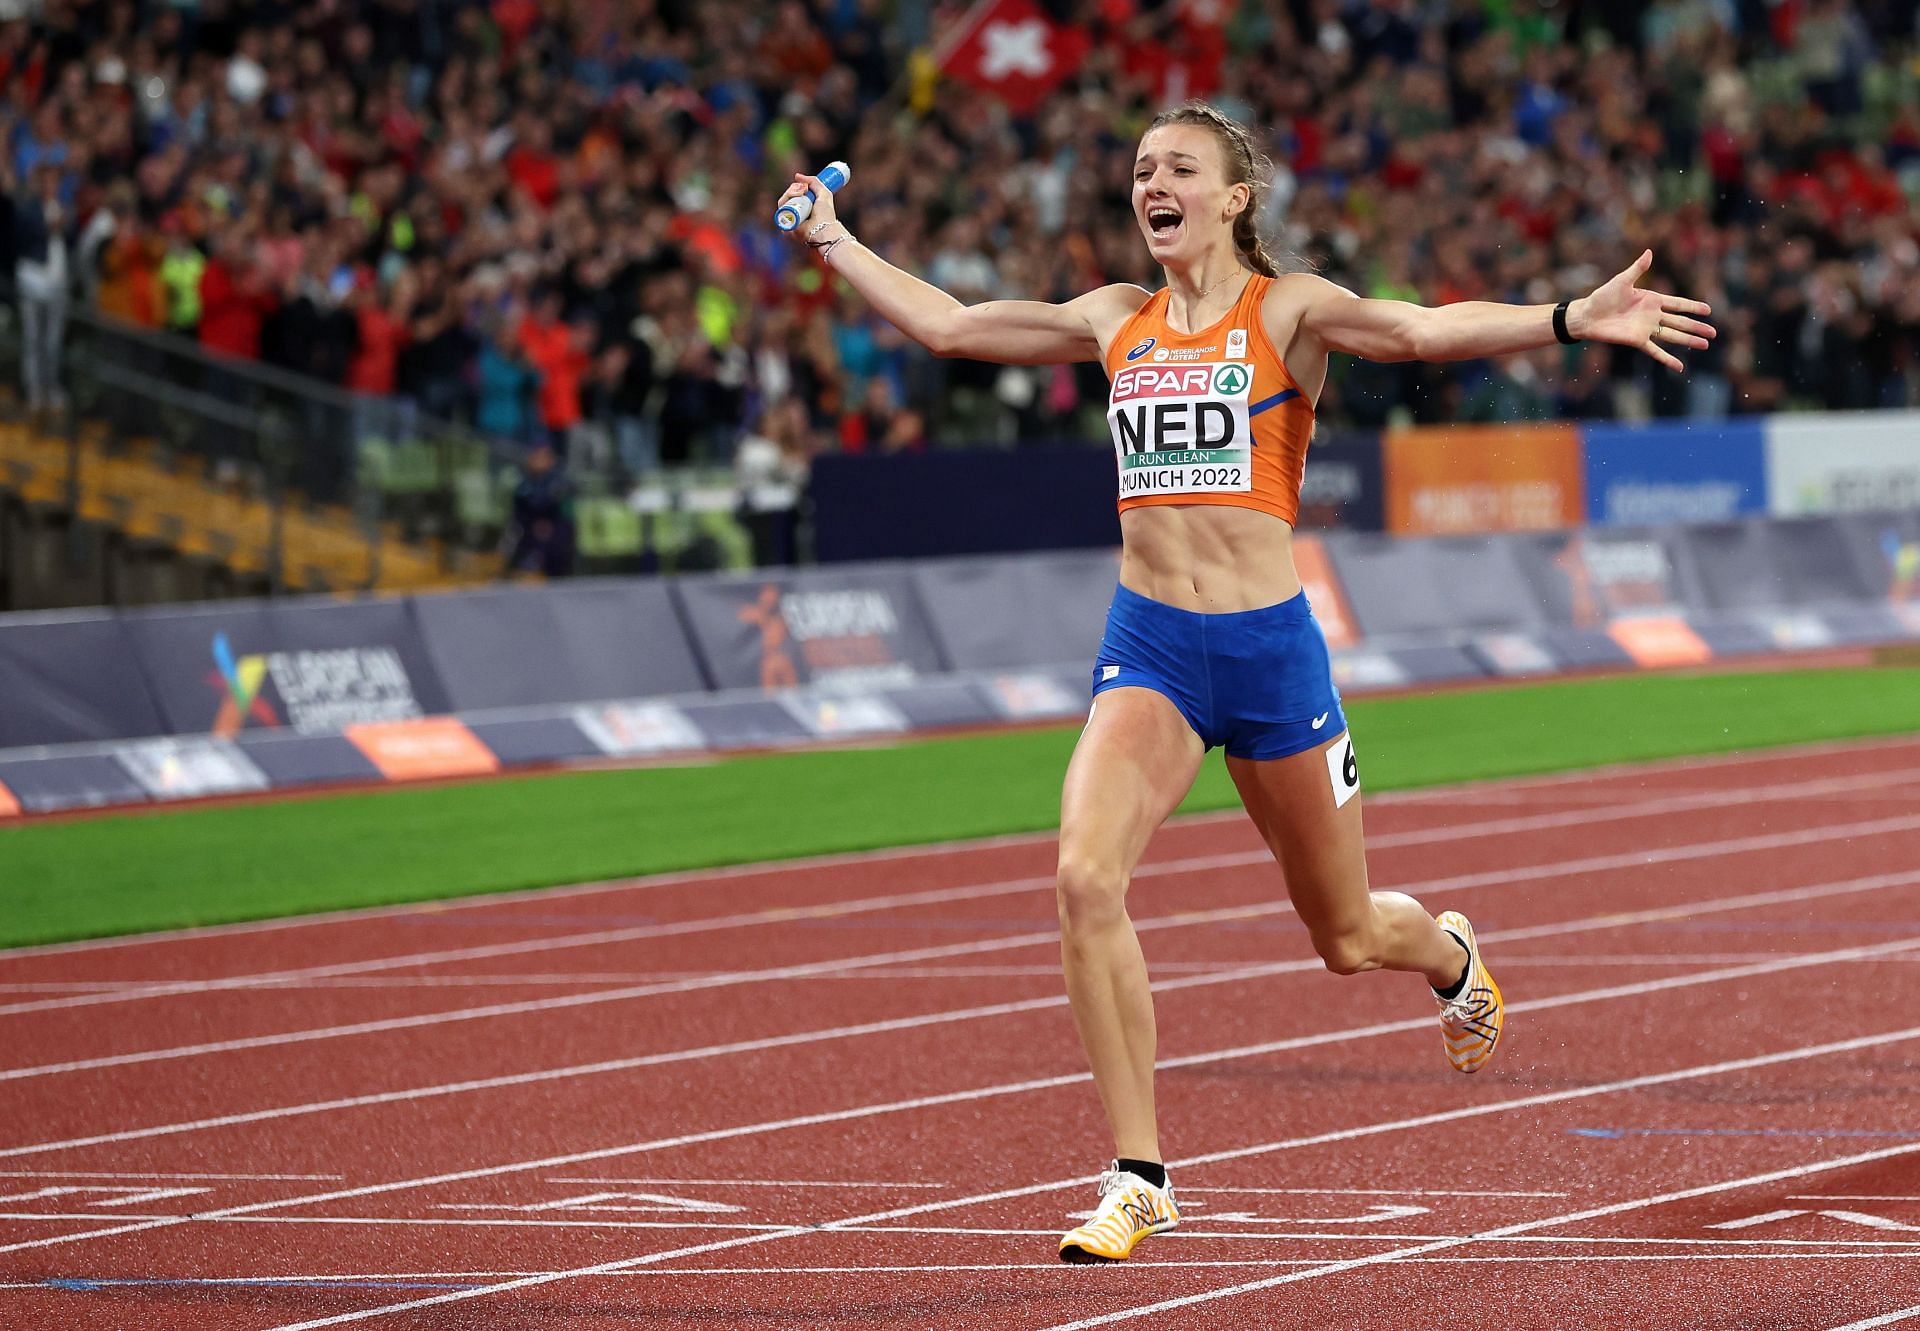 Gold medalist Femke Bol of Netherlands celebrates while crossing the finish line during the Athletics - Women&#039;s 4x400m Relay Final on day 10 of the European Championships Munich 2022 at Olympiapark on August 20, 2022 in Munich, Germany. (Photo by Alexander Hassenstein/Getty Images)